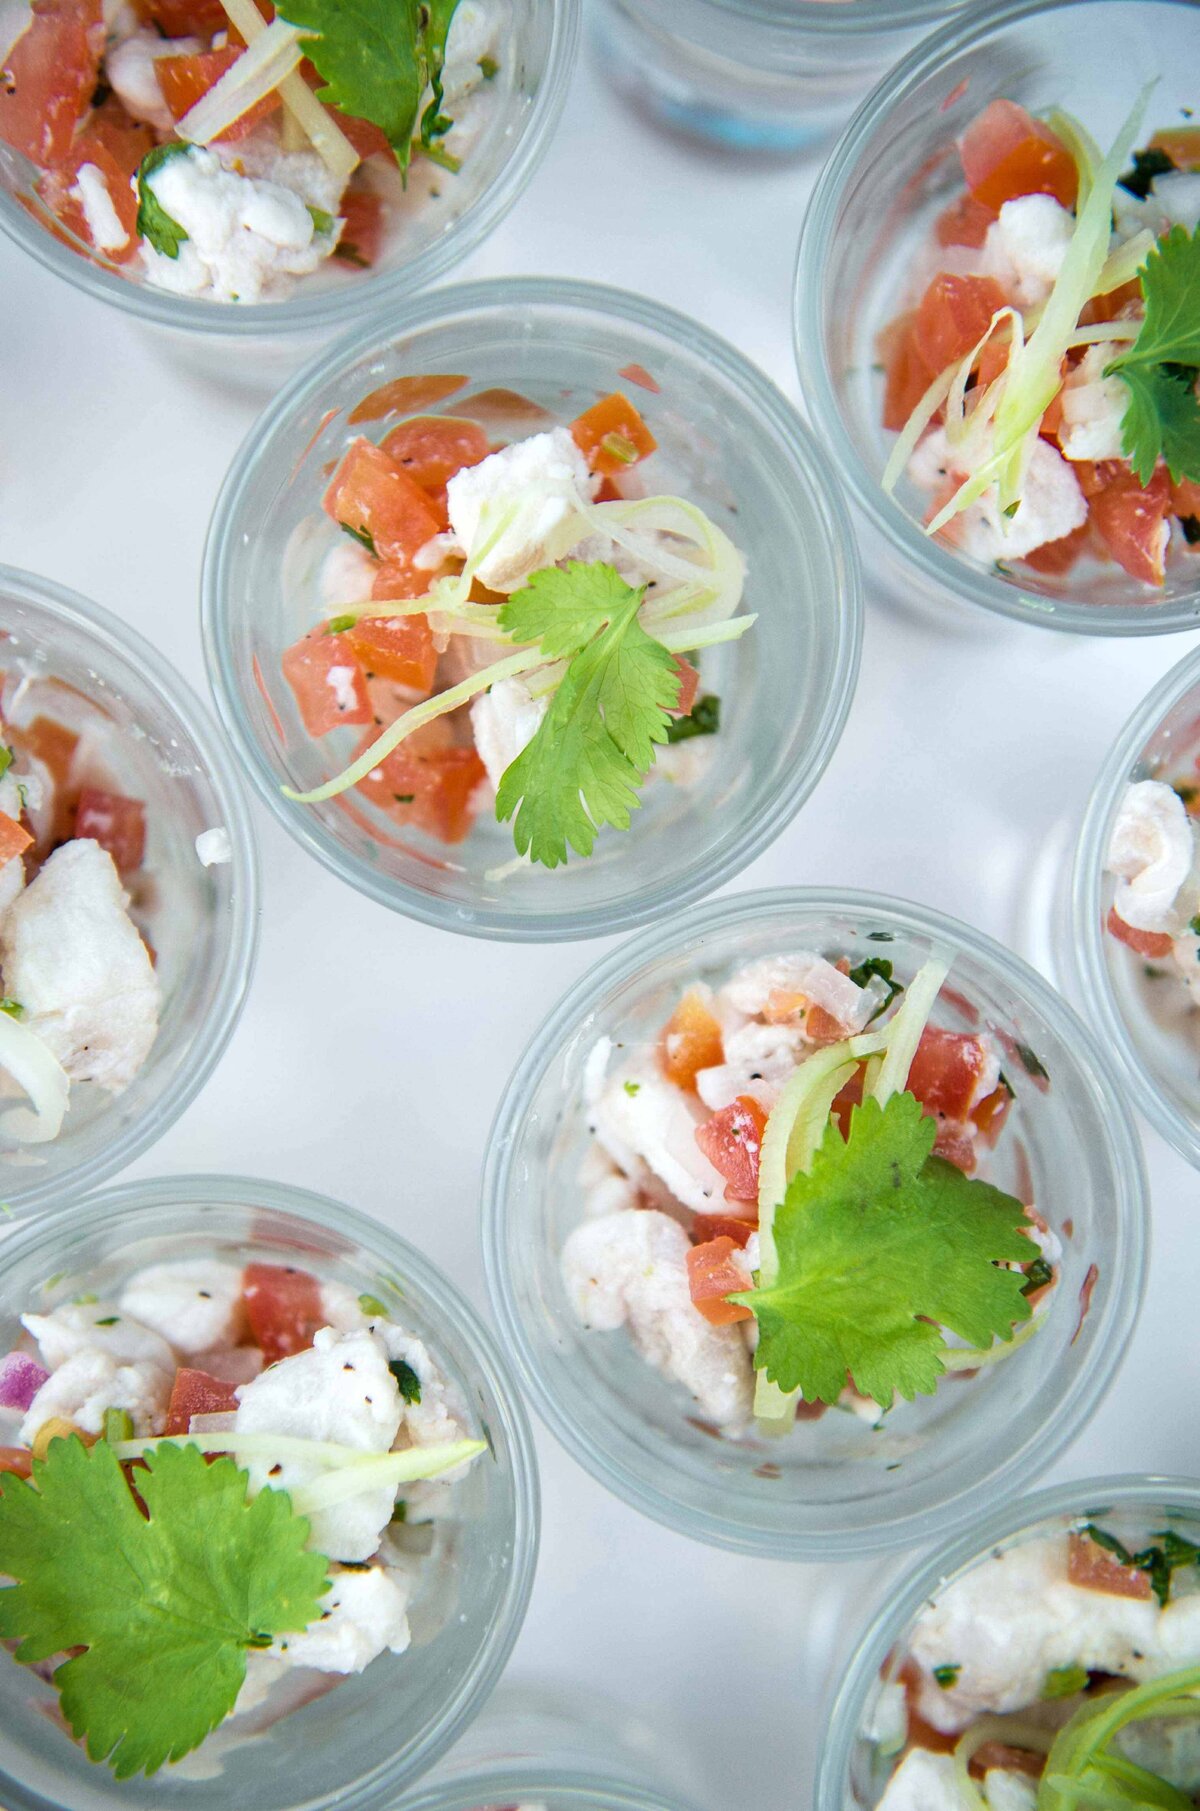 Ceviche served in individual cups